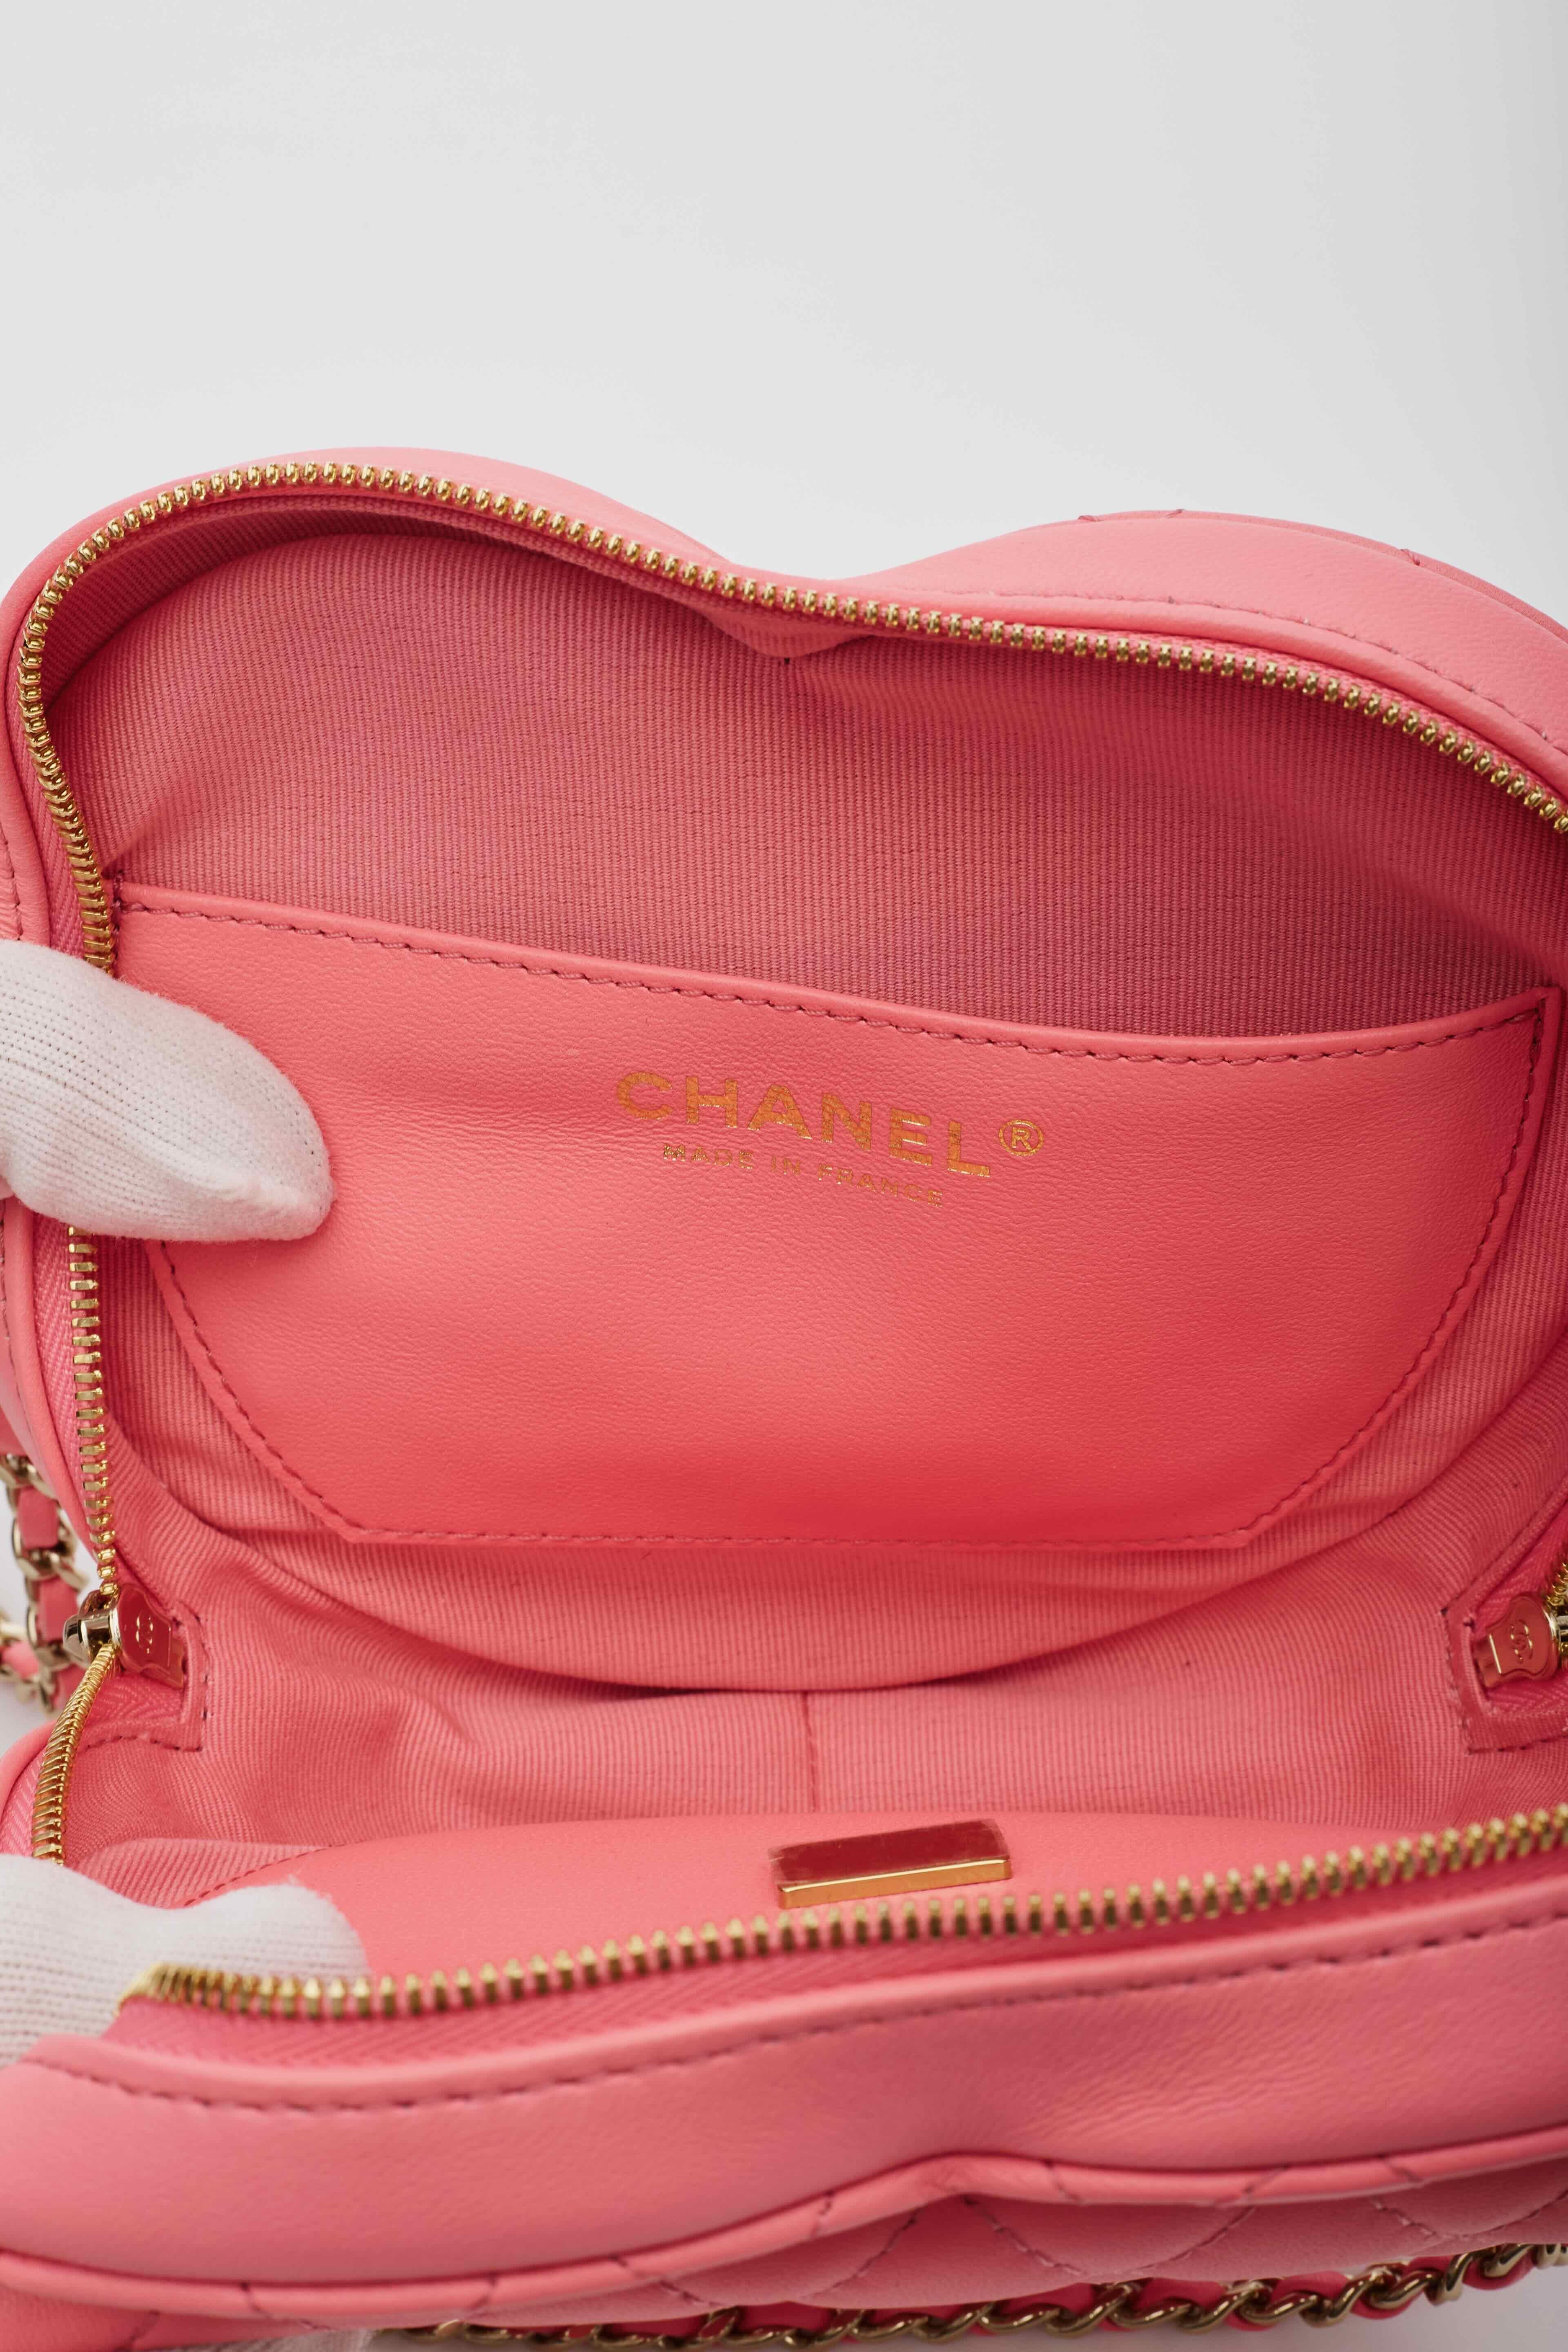 Chanel Lambskin Quilted CC In Love Heart Shoulder Bag Pink 1